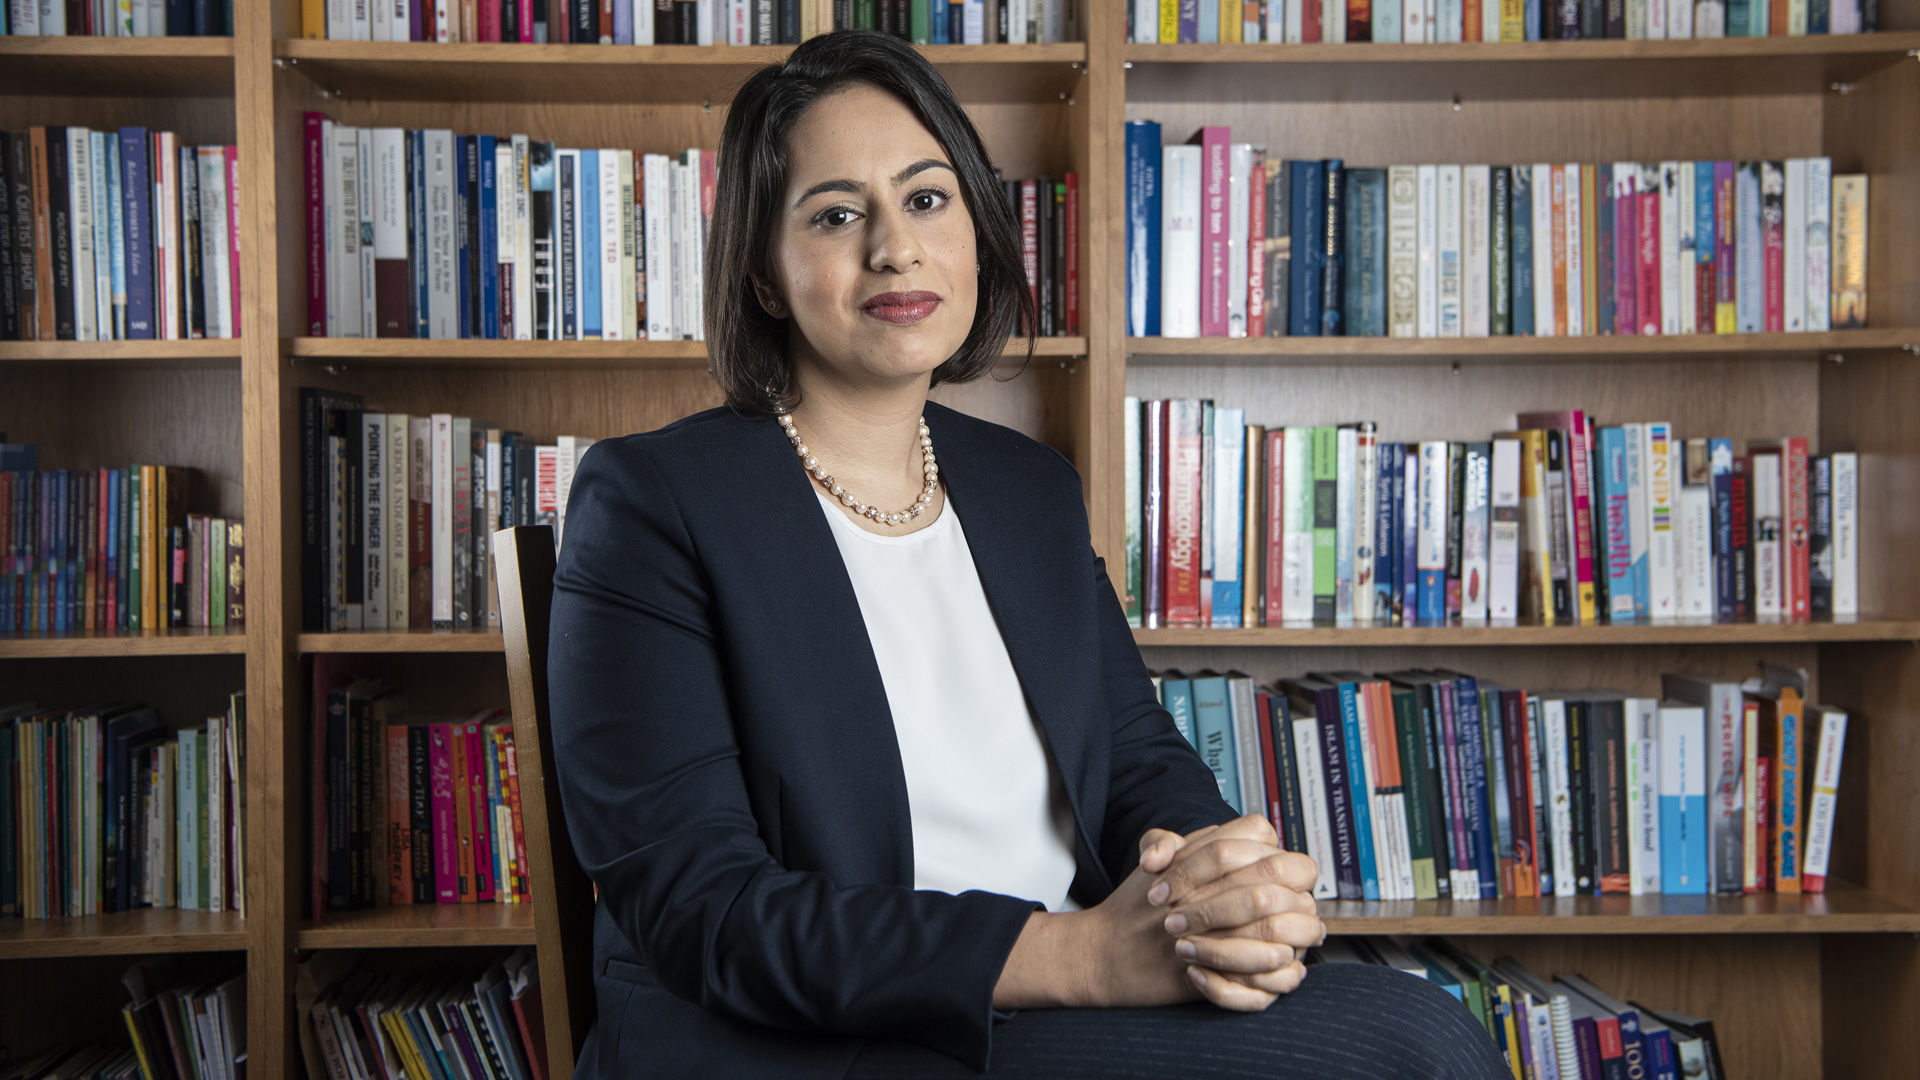 Sara Khan wearing black suit, smiling and sat in front of bookshelves full of books